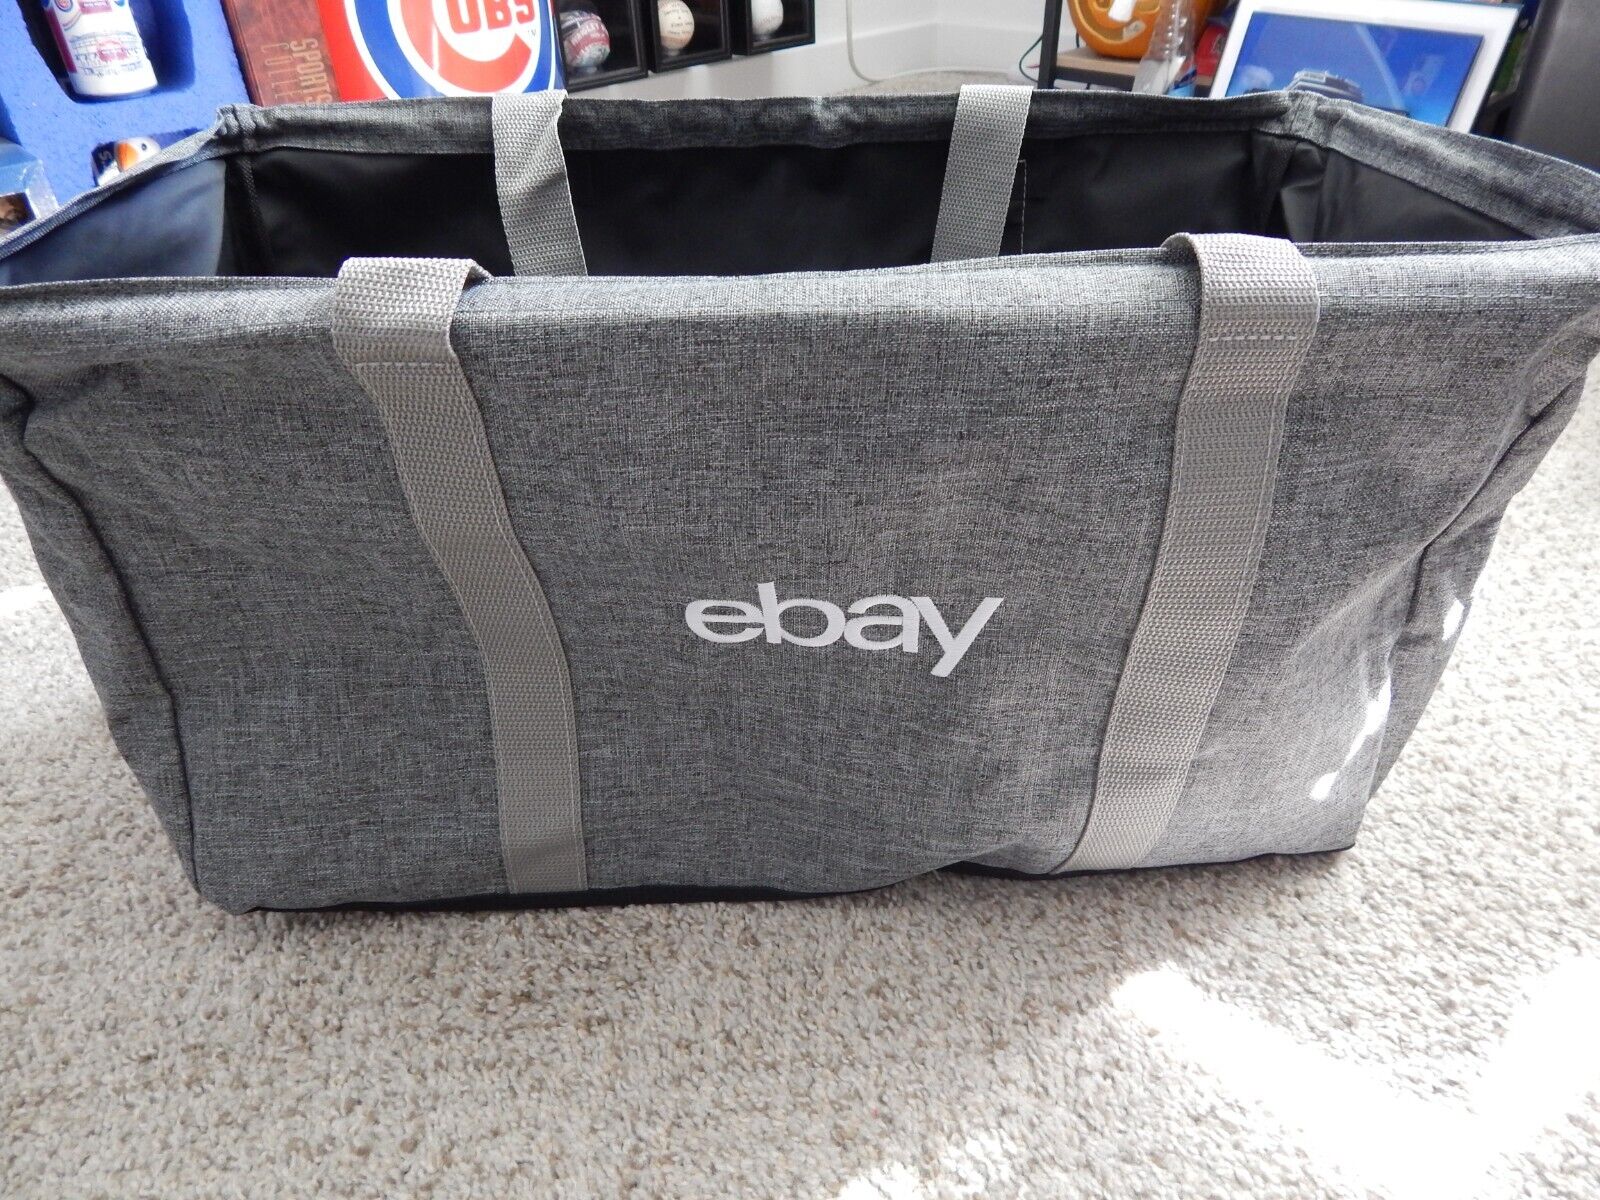 EBAY OPEN 2023 SELLERS SWAG REUSABLE GRAY LARGE FOLDING TOTE BAG WIRE FRAME NEW